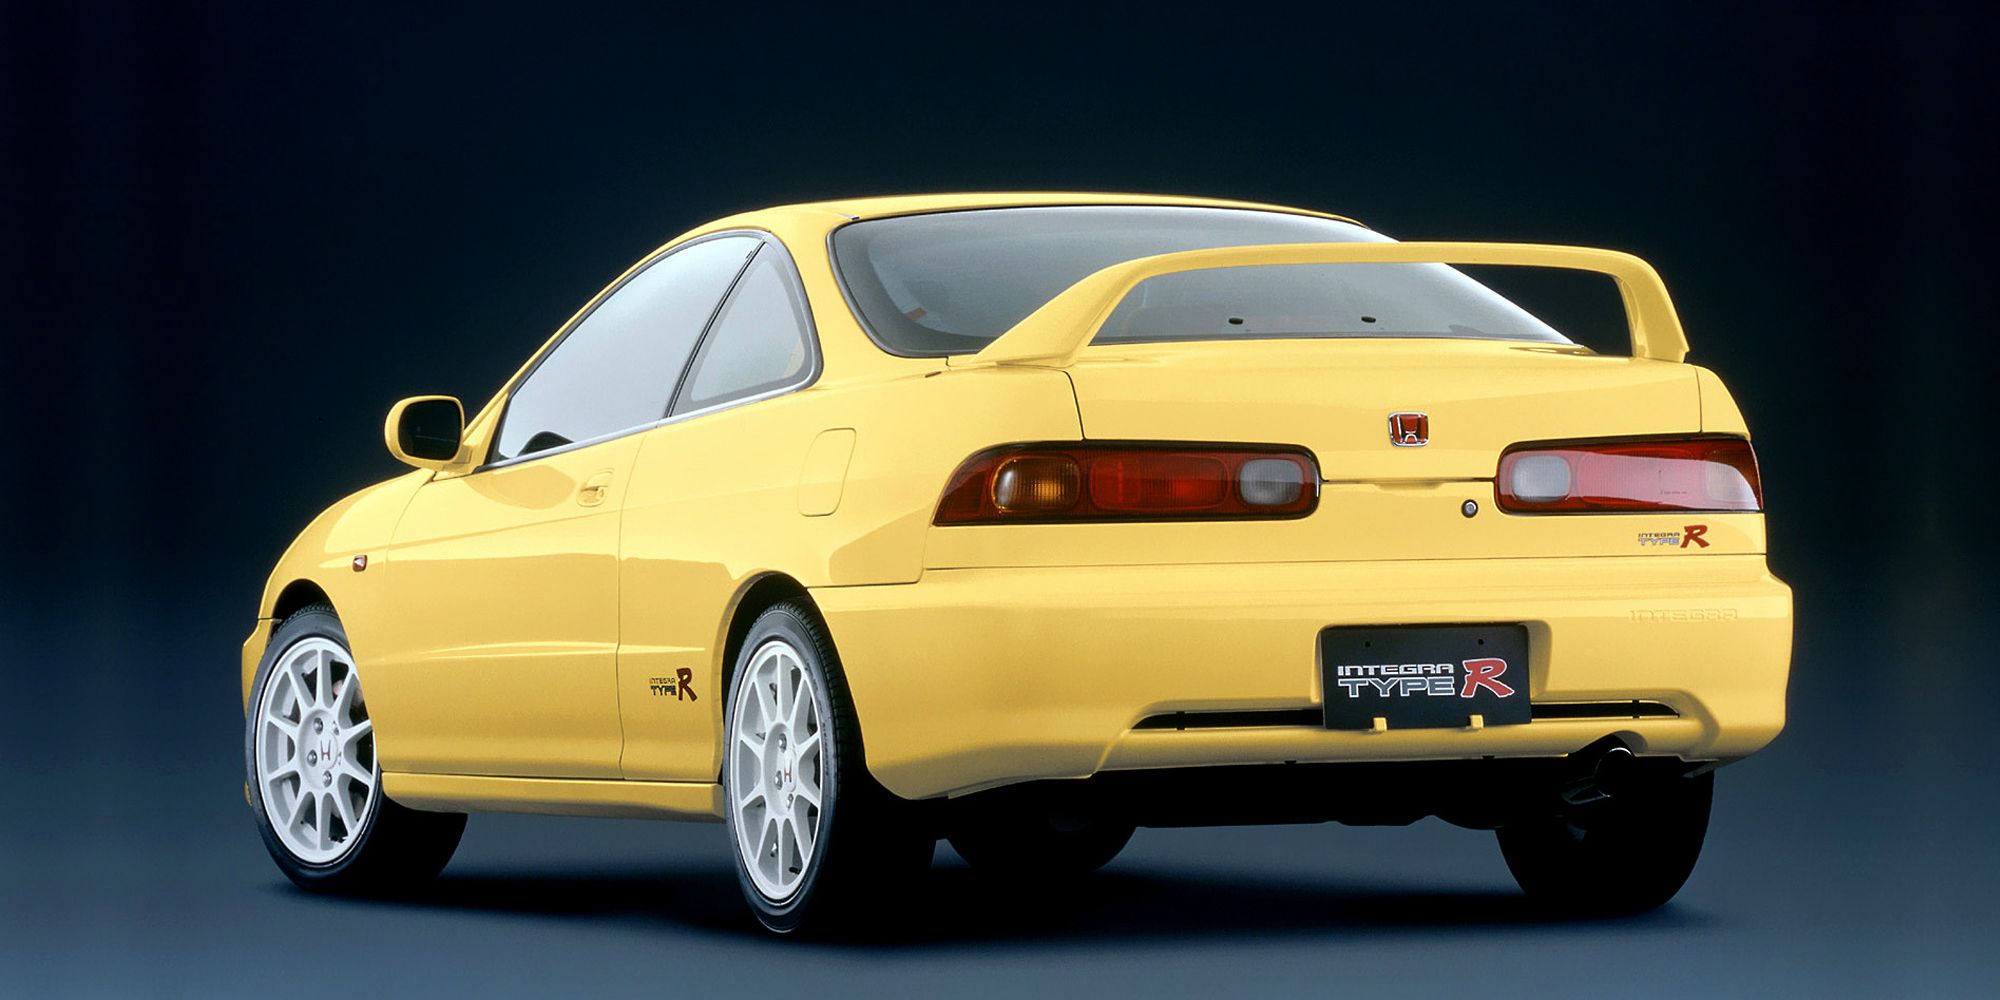 The rear of the Integra Type R